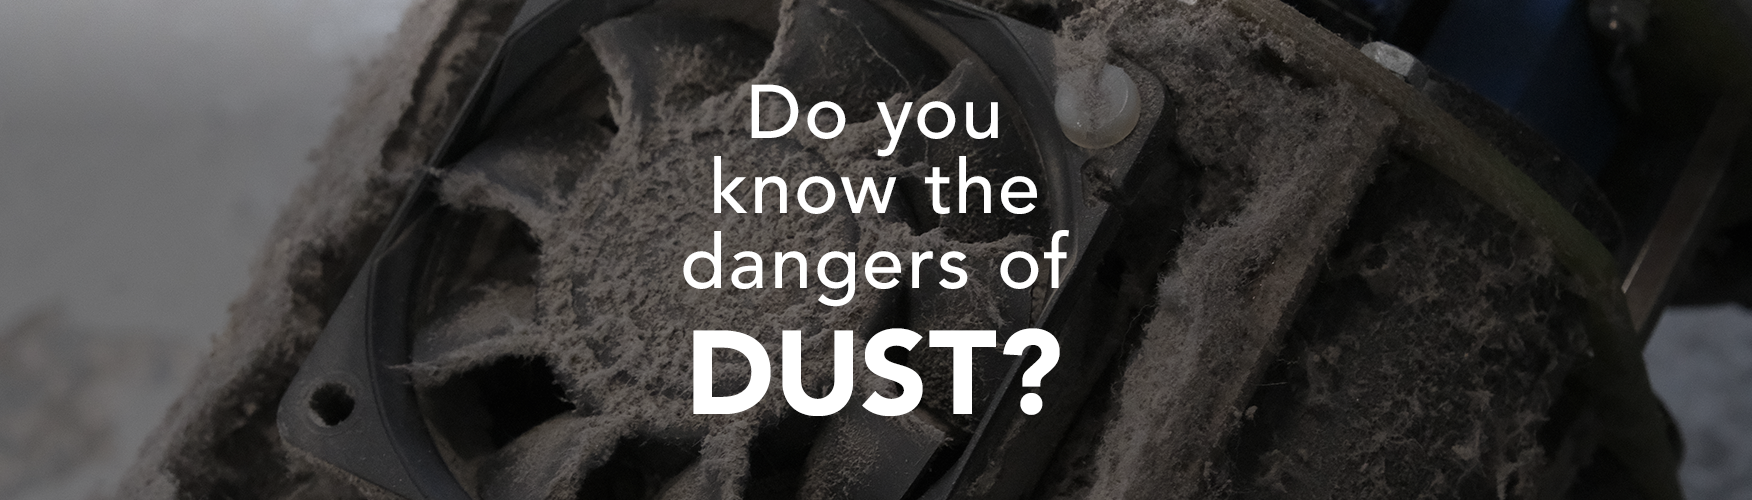 Do you know the dangers of DUST?